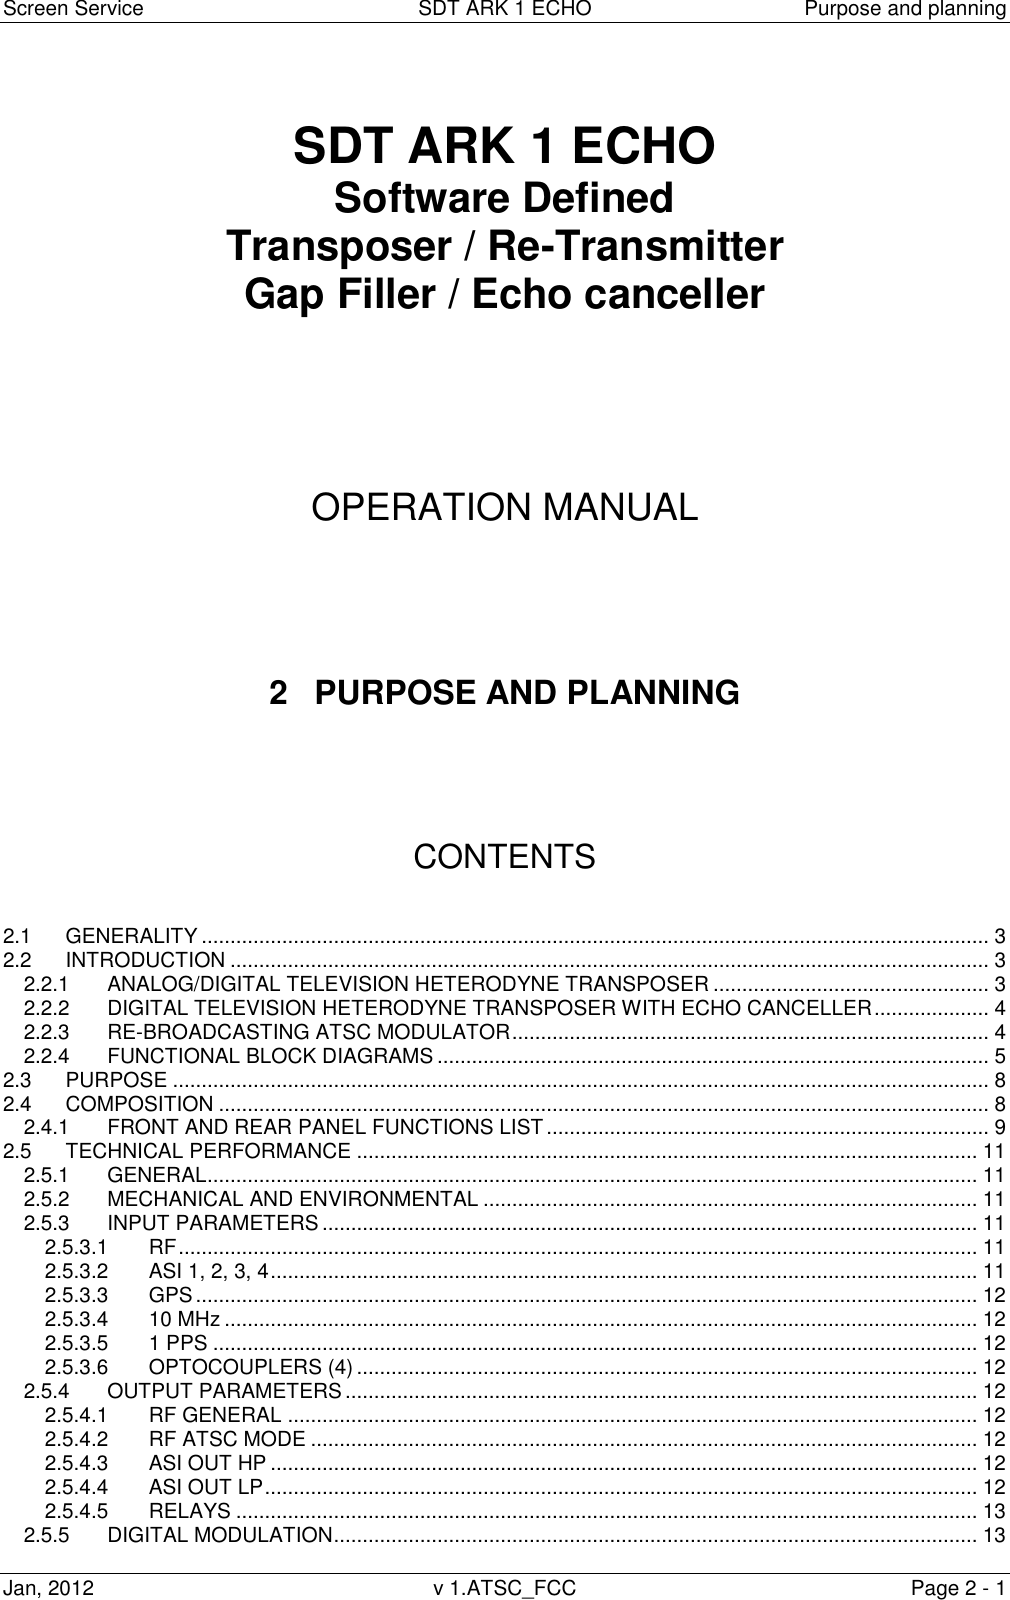 Screen Service  SDT ARK 1 ECHO  Purpose and planning Jan, 2012  v 1.ATSC_FCC  Page 2 - 1   SDT ARK 1 ECHO Software Defined Transposer / Re-Transmitter Gap Filler / Echo canceller       OPERATION MANUAL      2  PURPOSE AND PLANNING      CONTENTS   2.1 GENERALITY ......................................................................................................................................... 3 2.2 INTRODUCTION .................................................................................................................................... 3 2.2.1 ANALOG/DIGITAL TELEVISION HETERODYNE TRANSPOSER ................................................ 3 2.2.2 DIGITAL TELEVISION HETERODYNE TRANSPOSER WITH ECHO CANCELLER .................... 4 2.2.3 RE-BROADCASTING ATSC MODULATOR ................................................................................... 4 2.2.4 FUNCTIONAL BLOCK DIAGRAMS ................................................................................................ 5 2.3 PURPOSE .............................................................................................................................................. 8 2.4 COMPOSITION ...................................................................................................................................... 8 2.4.1 FRONT AND REAR PANEL FUNCTIONS LIST ............................................................................. 9 2.5 TECHNICAL PERFORMANCE ............................................................................................................ 11 2.5.1 GENERAL ...................................................................................................................................... 11 2.5.2 MECHANICAL AND ENVIRONMENTAL ...................................................................................... 11 2.5.3 INPUT PARAMETERS .................................................................................................................. 11 2.5.3.1 RF ........................................................................................................................................... 11 2.5.3.2 ASI 1, 2, 3, 4 ........................................................................................................................... 11 2.5.3.3 GPS ........................................................................................................................................ 12 2.5.3.4 10 MHz ................................................................................................................................... 12 2.5.3.5 1 PPS ..................................................................................................................................... 12 2.5.3.6 OPTOCOUPLERS (4) ............................................................................................................ 12 2.5.4 OUTPUT PARAMETERS .............................................................................................................. 12 2.5.4.1 RF GENERAL ........................................................................................................................ 12 2.5.4.2 RF ATSC MODE .................................................................................................................... 12 2.5.4.3 ASI OUT HP ........................................................................................................................... 12 2.5.4.4 ASI OUT LP ............................................................................................................................ 12 2.5.4.5 RELAYS ................................................................................................................................. 13 2.5.5 DIGITAL MODULATION ................................................................................................................ 13 